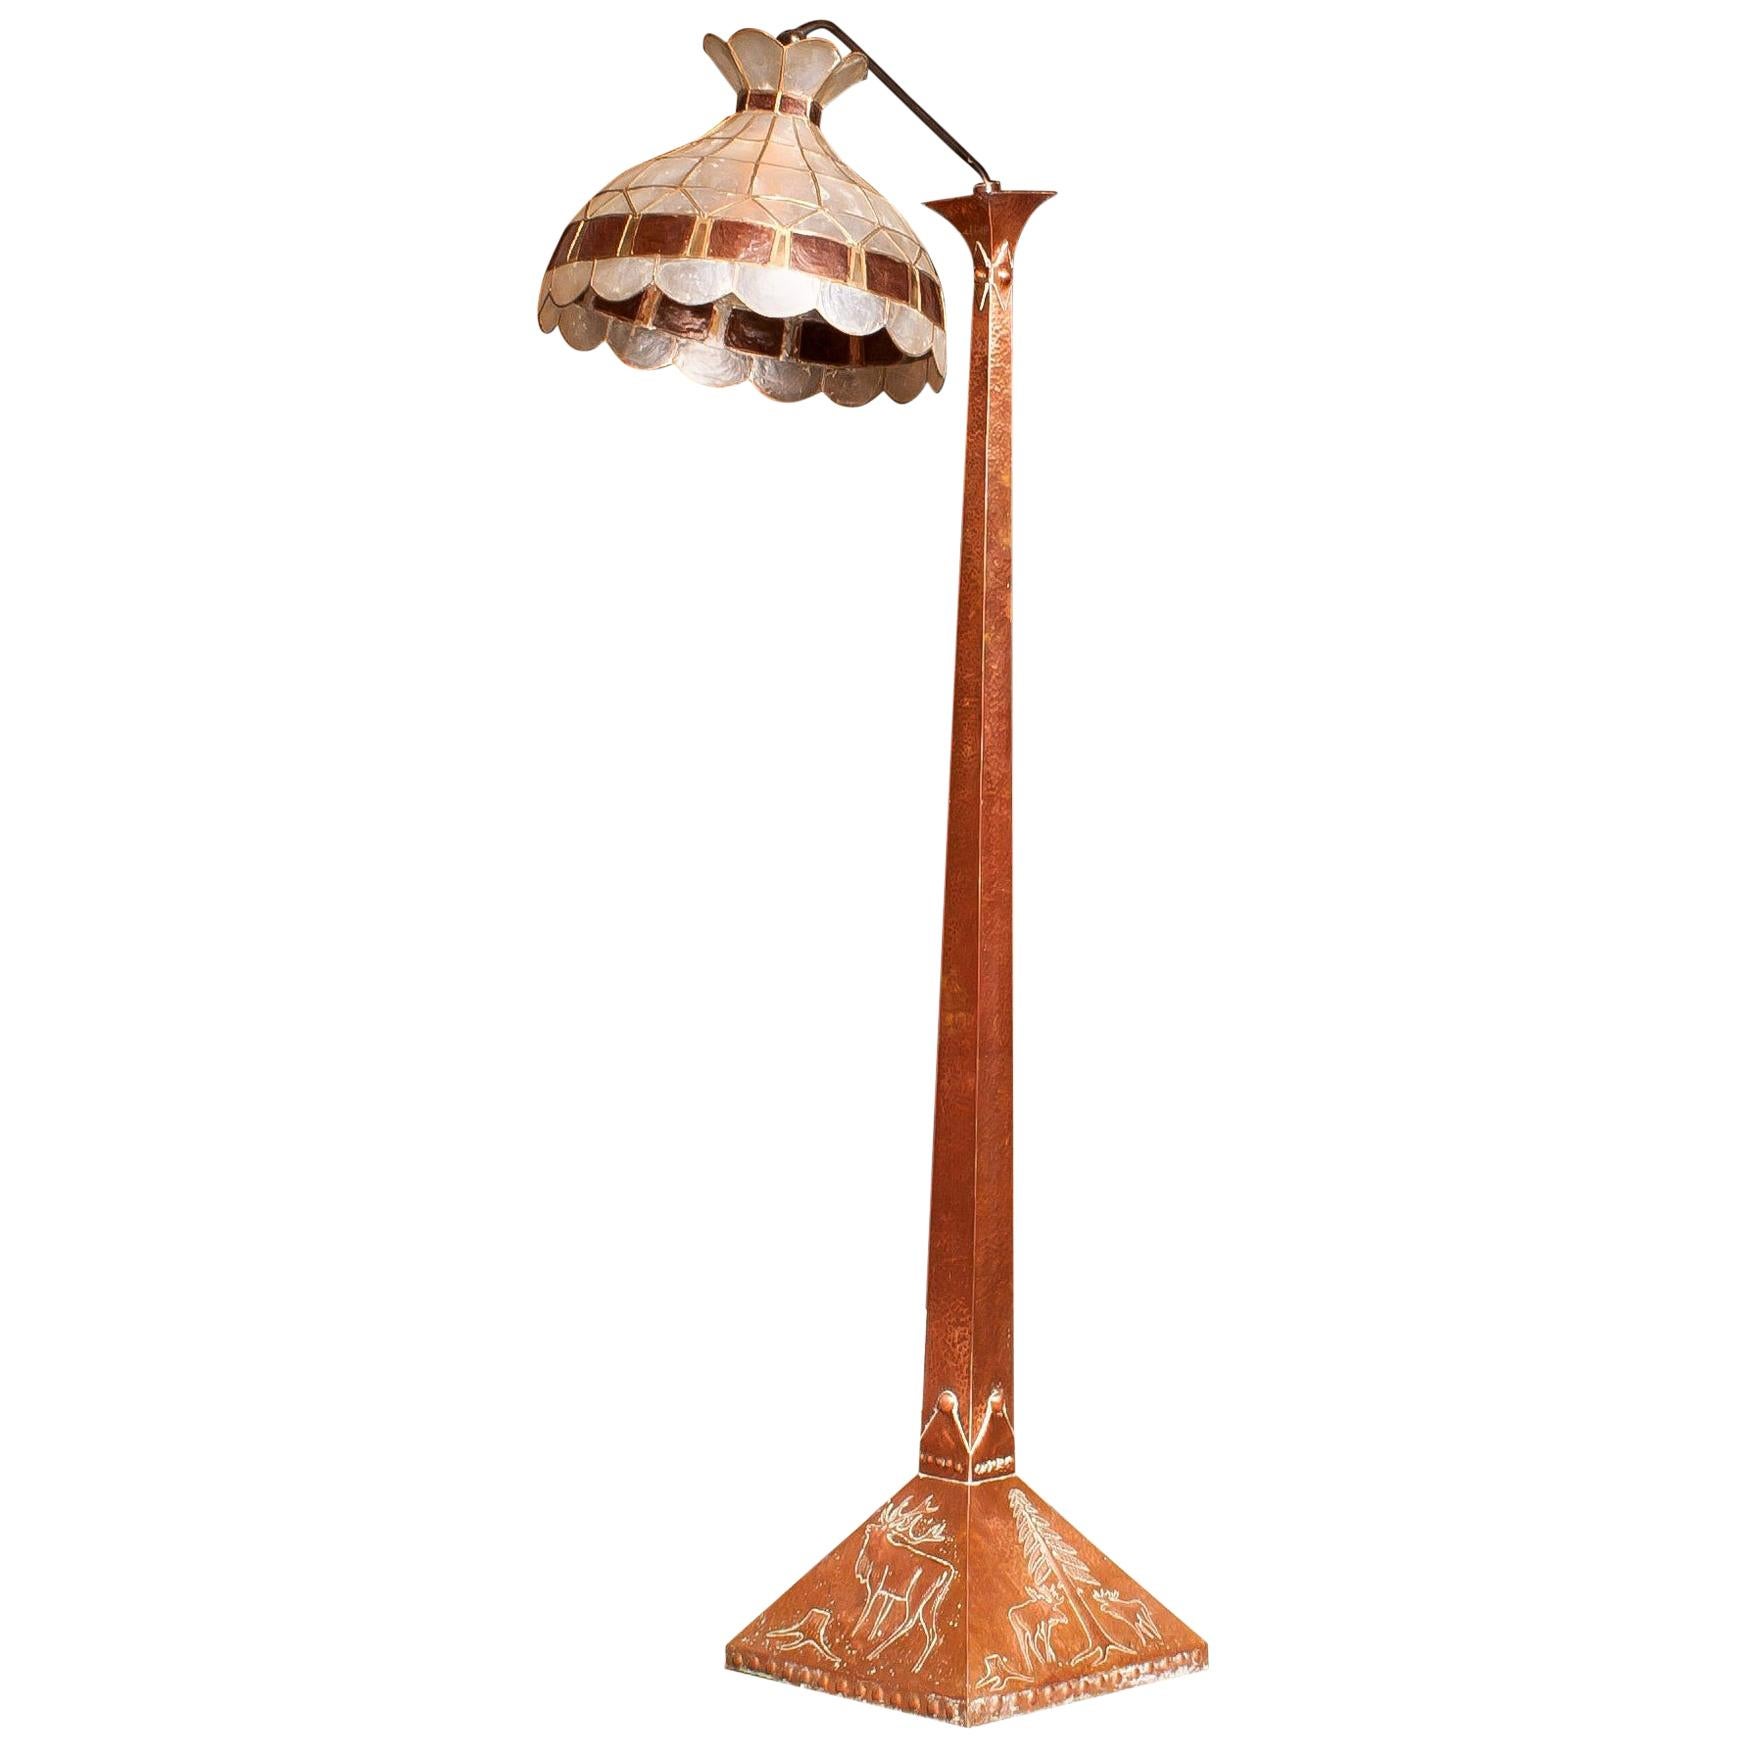 This exceptional rare floor light in Jugendstil is fully made by hand in Sweden and in beautiful condition.
In the base are typical Swedish images hammered on all four sides.
Base measurements are: 36 x 36 cm. and the total height of the floor